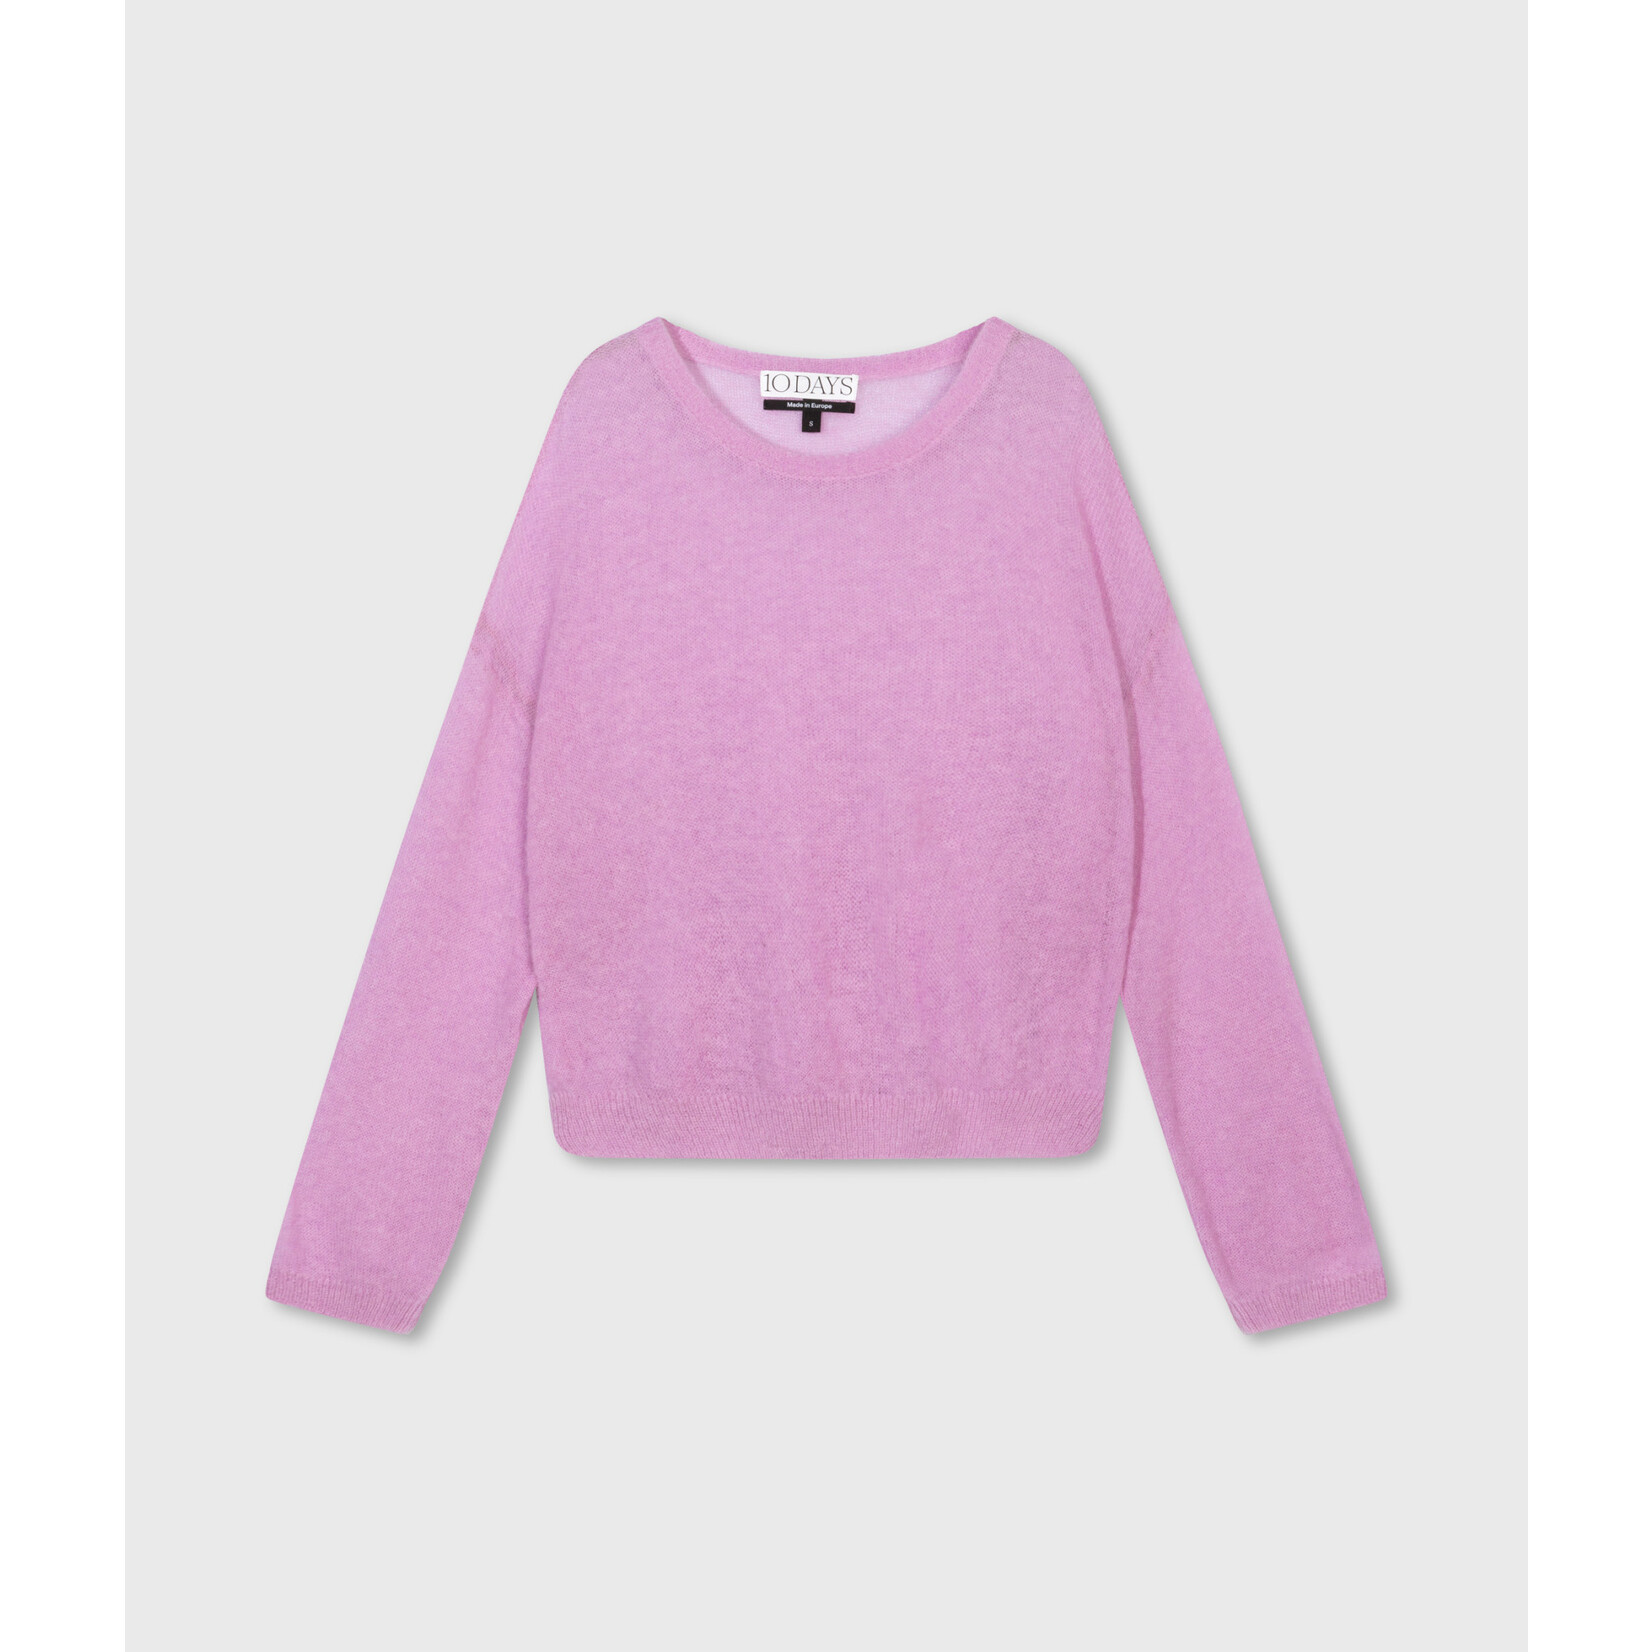 10Days Sweater thin knit Violet